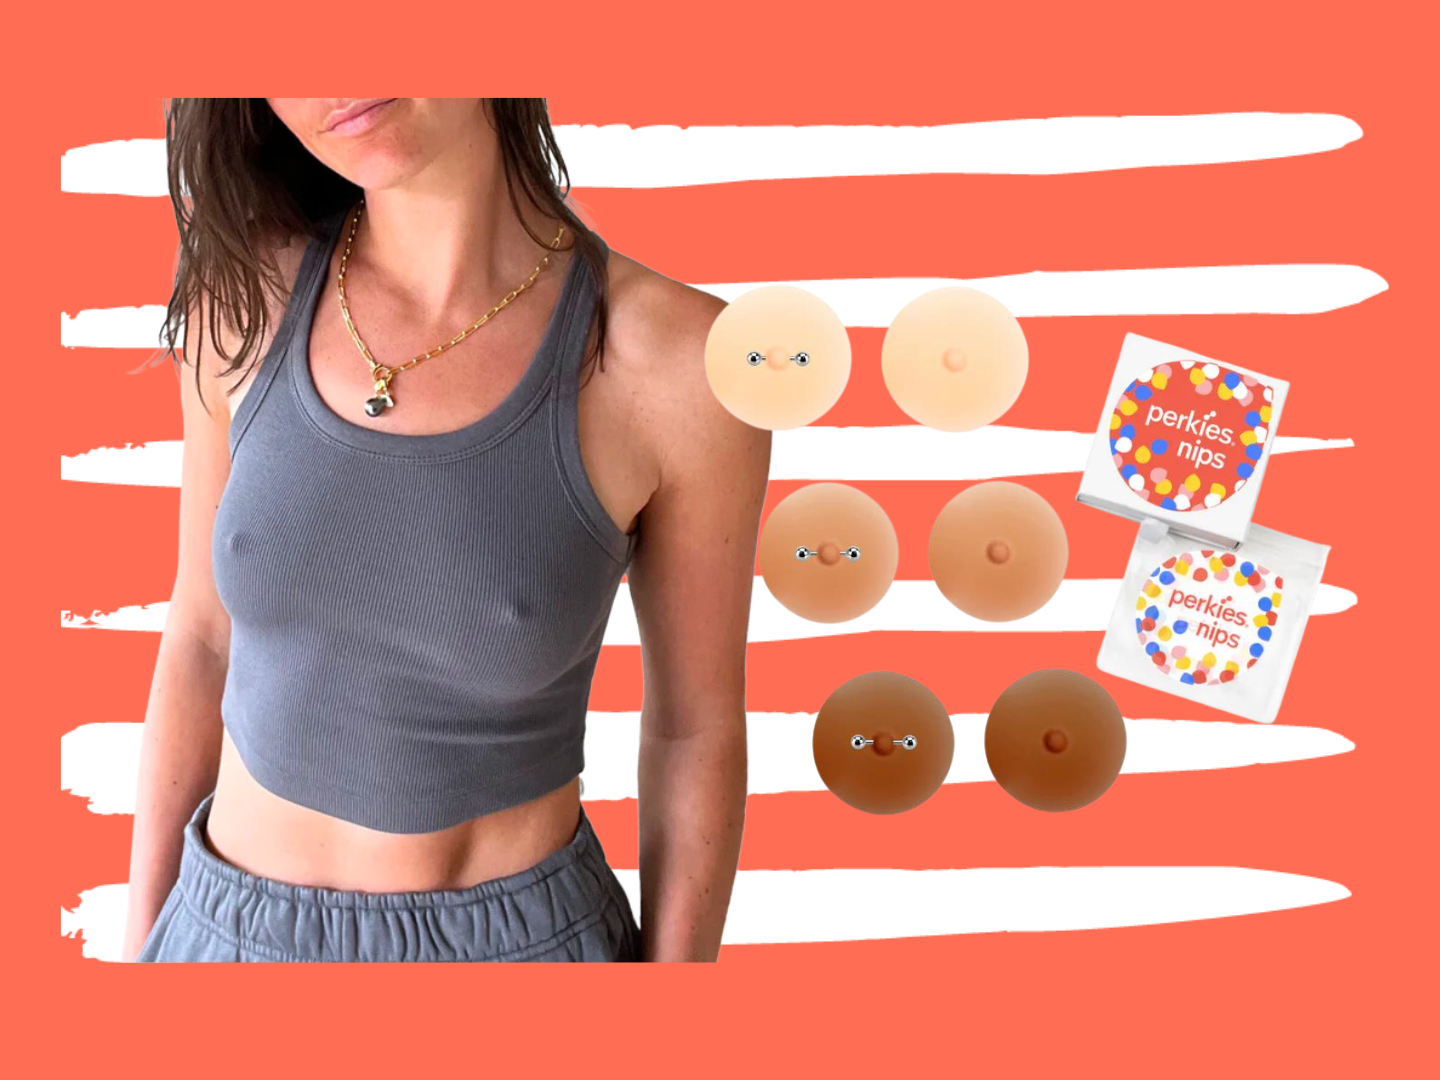 Collage of a person in a tank top with visible nipples and faux nipple silicone pads.